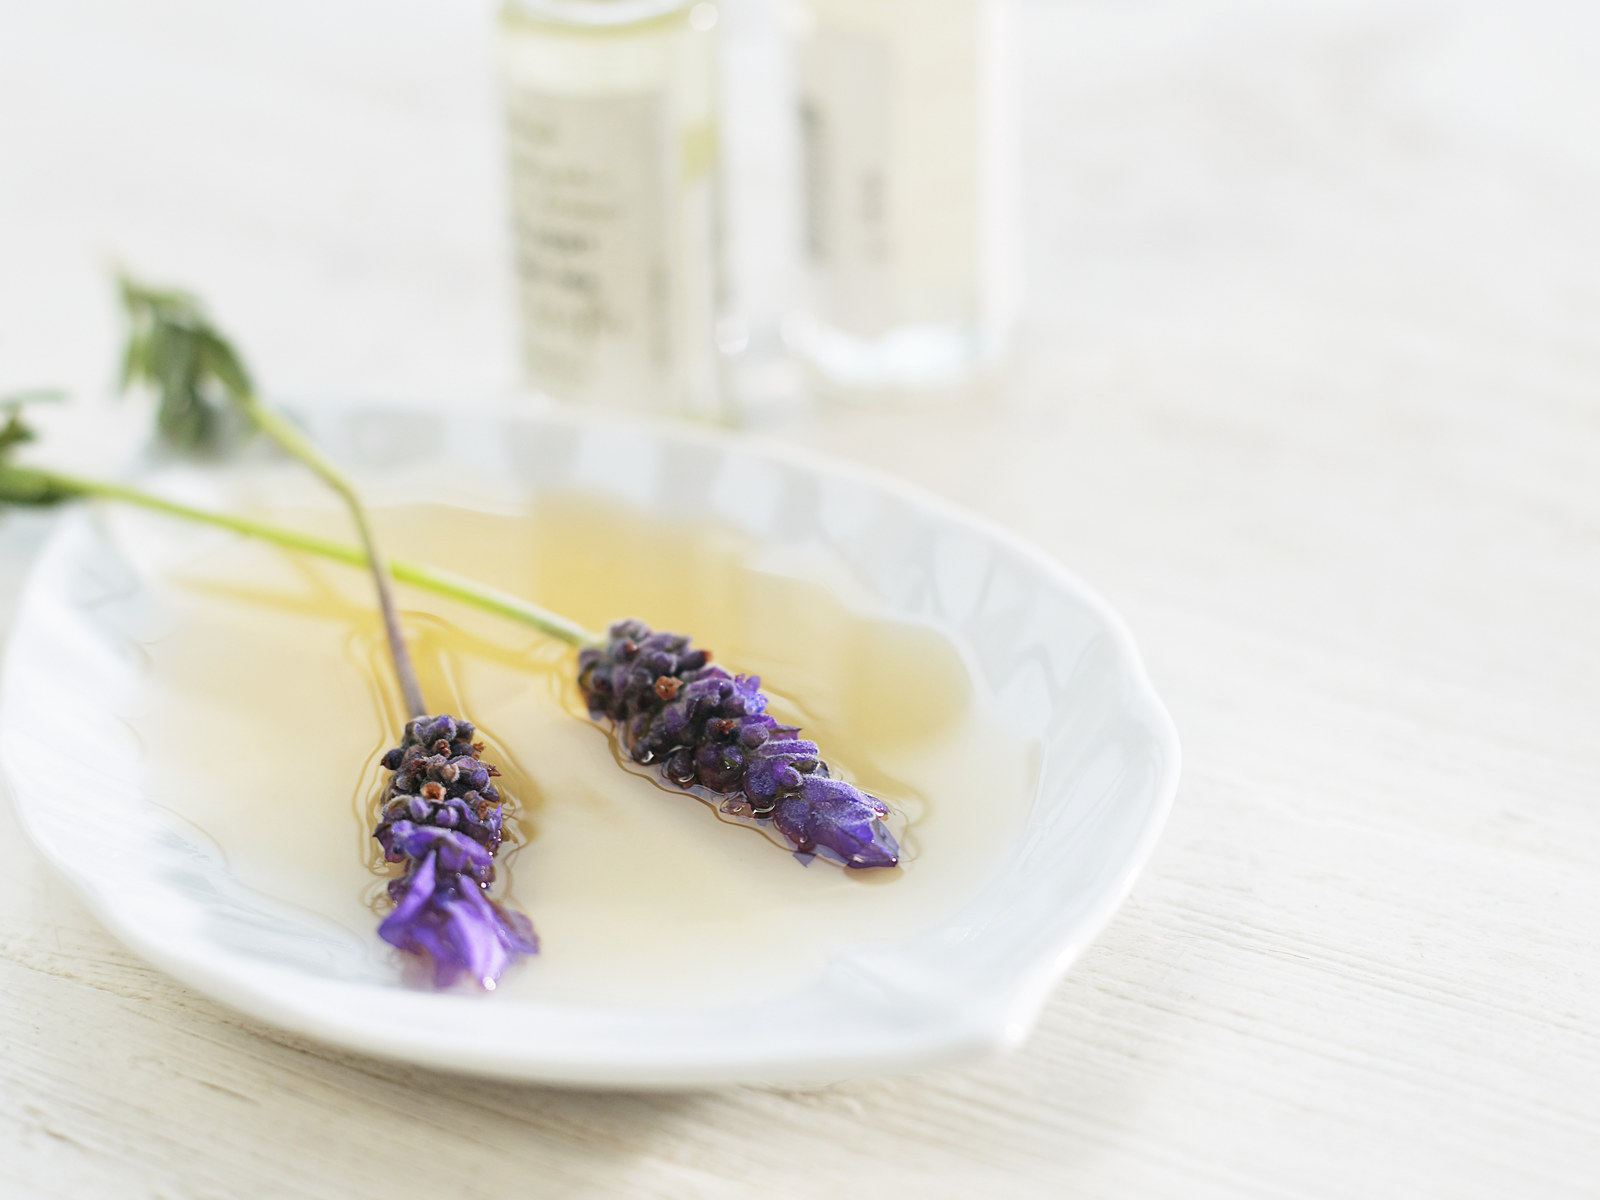 Lavender Flowers in Dish of Essential Oils